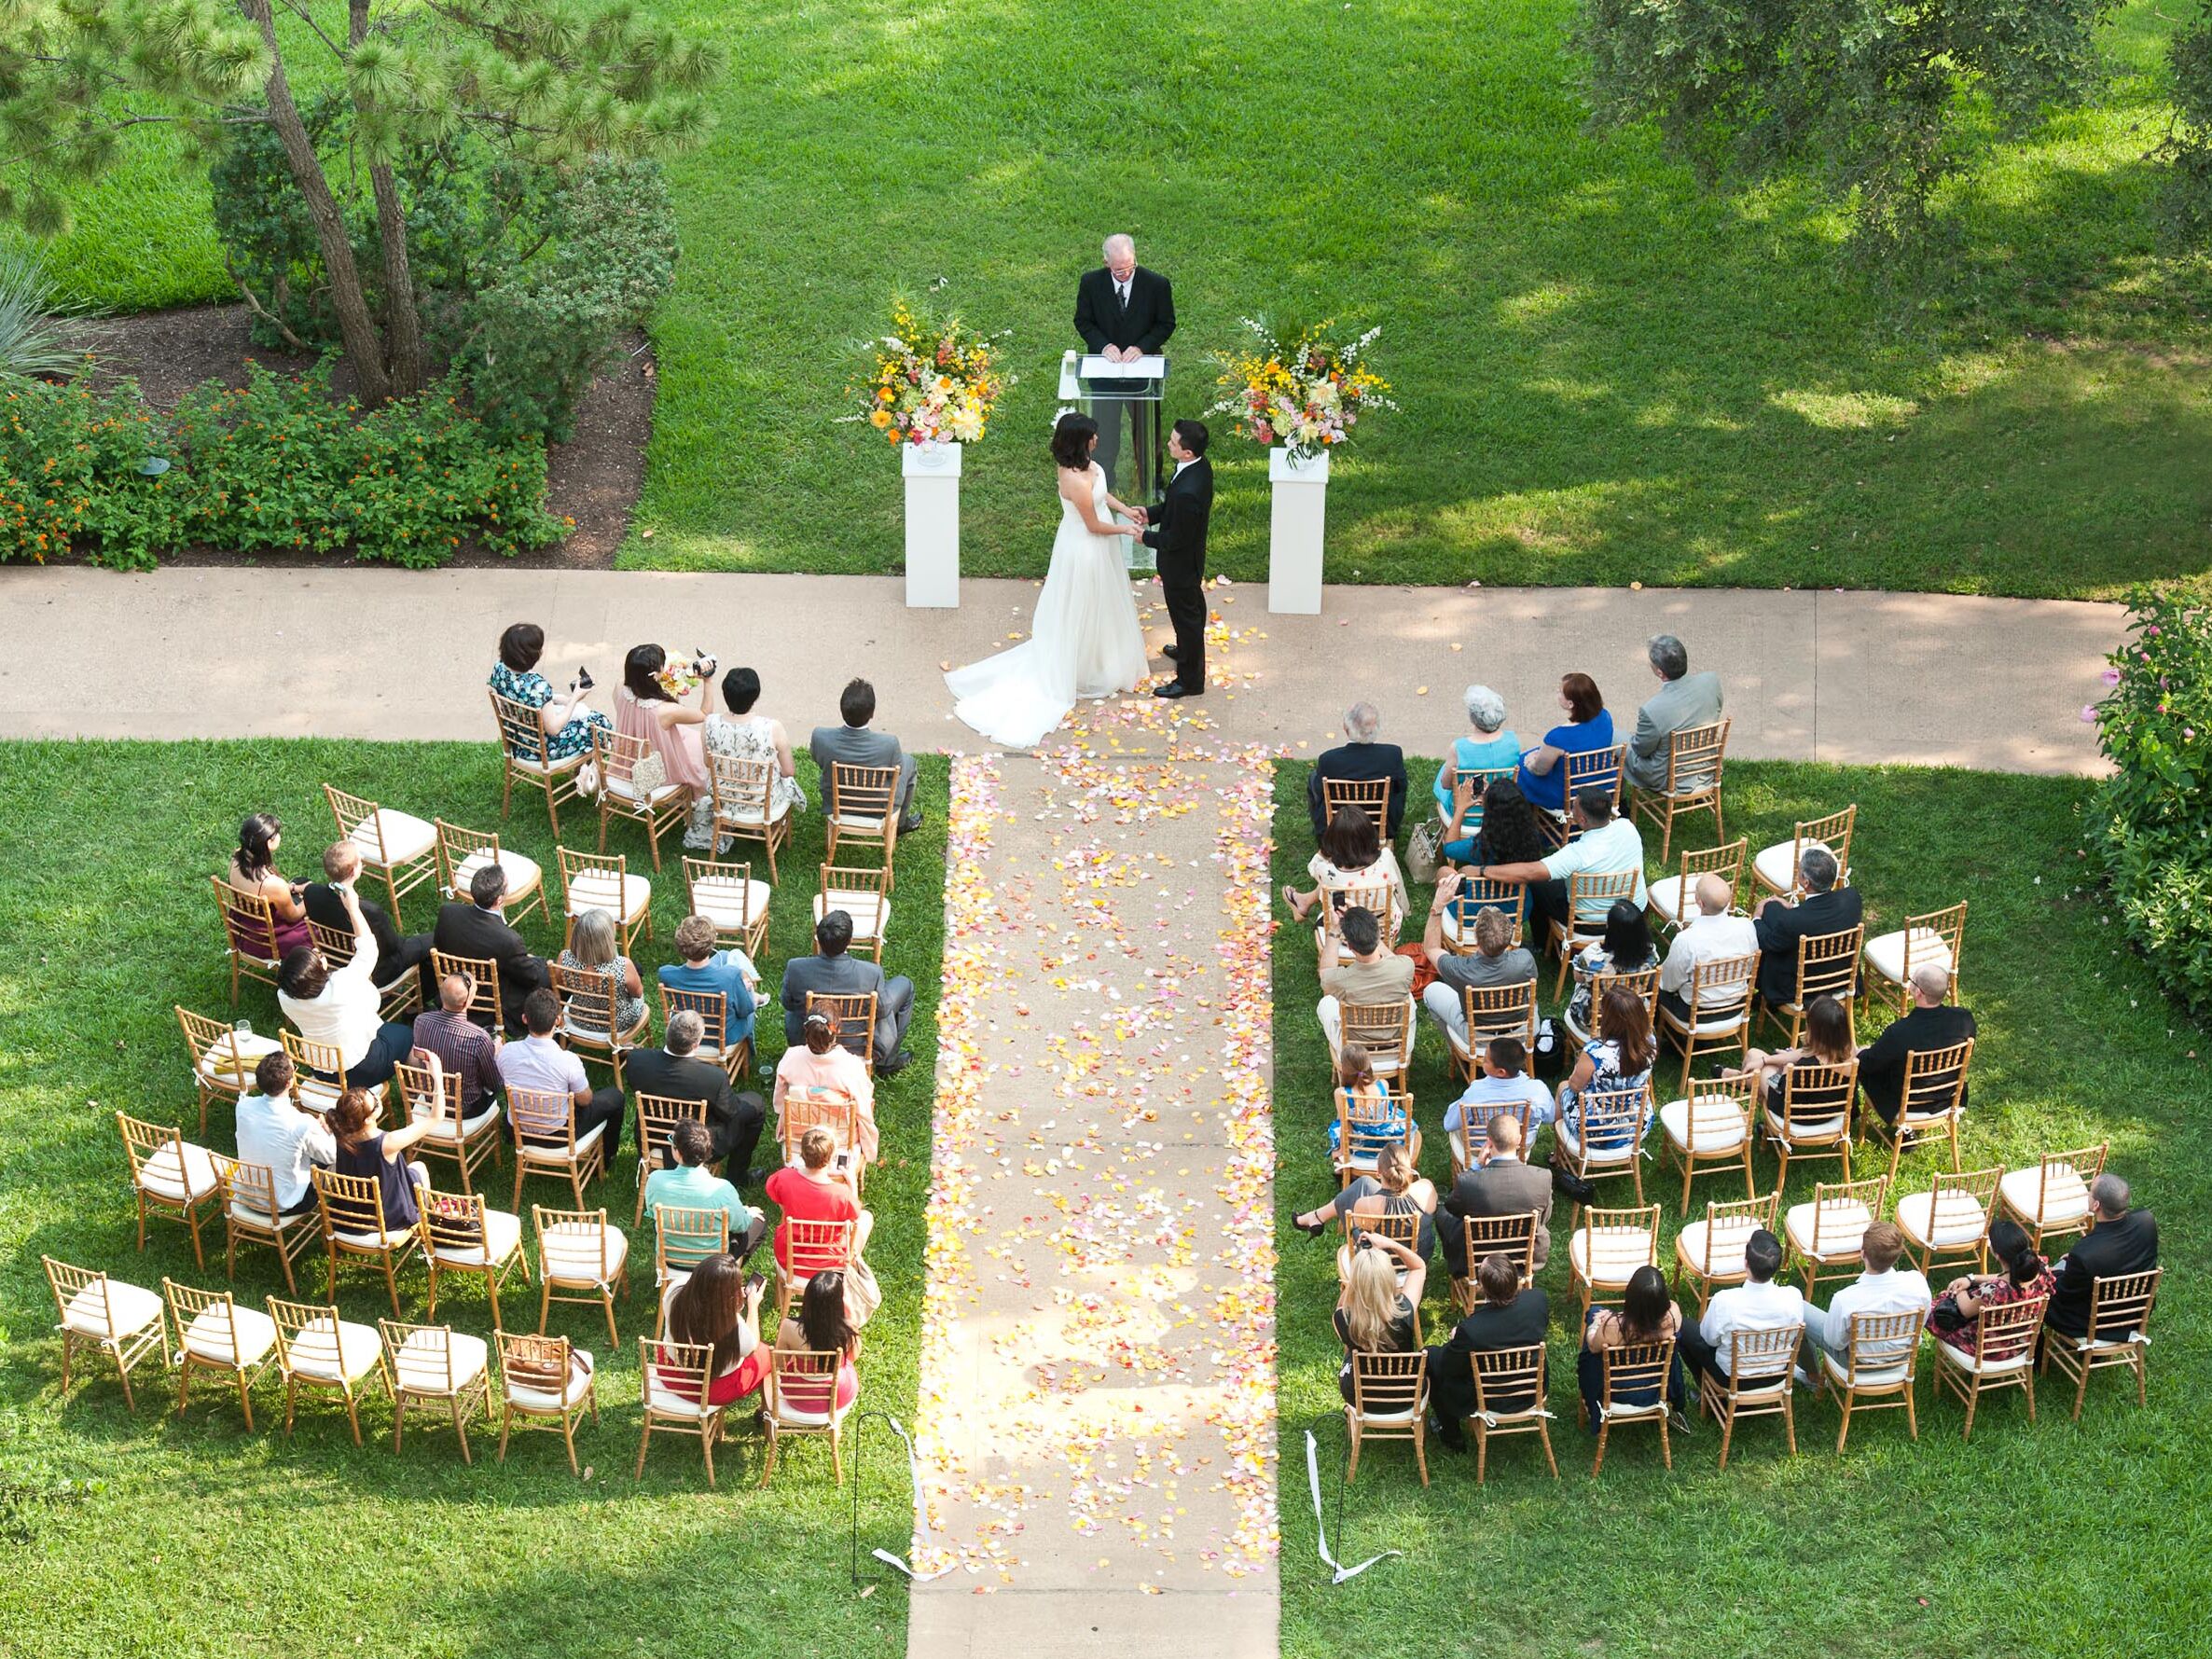 Is Having a Small Wedding Ceremony Rude?